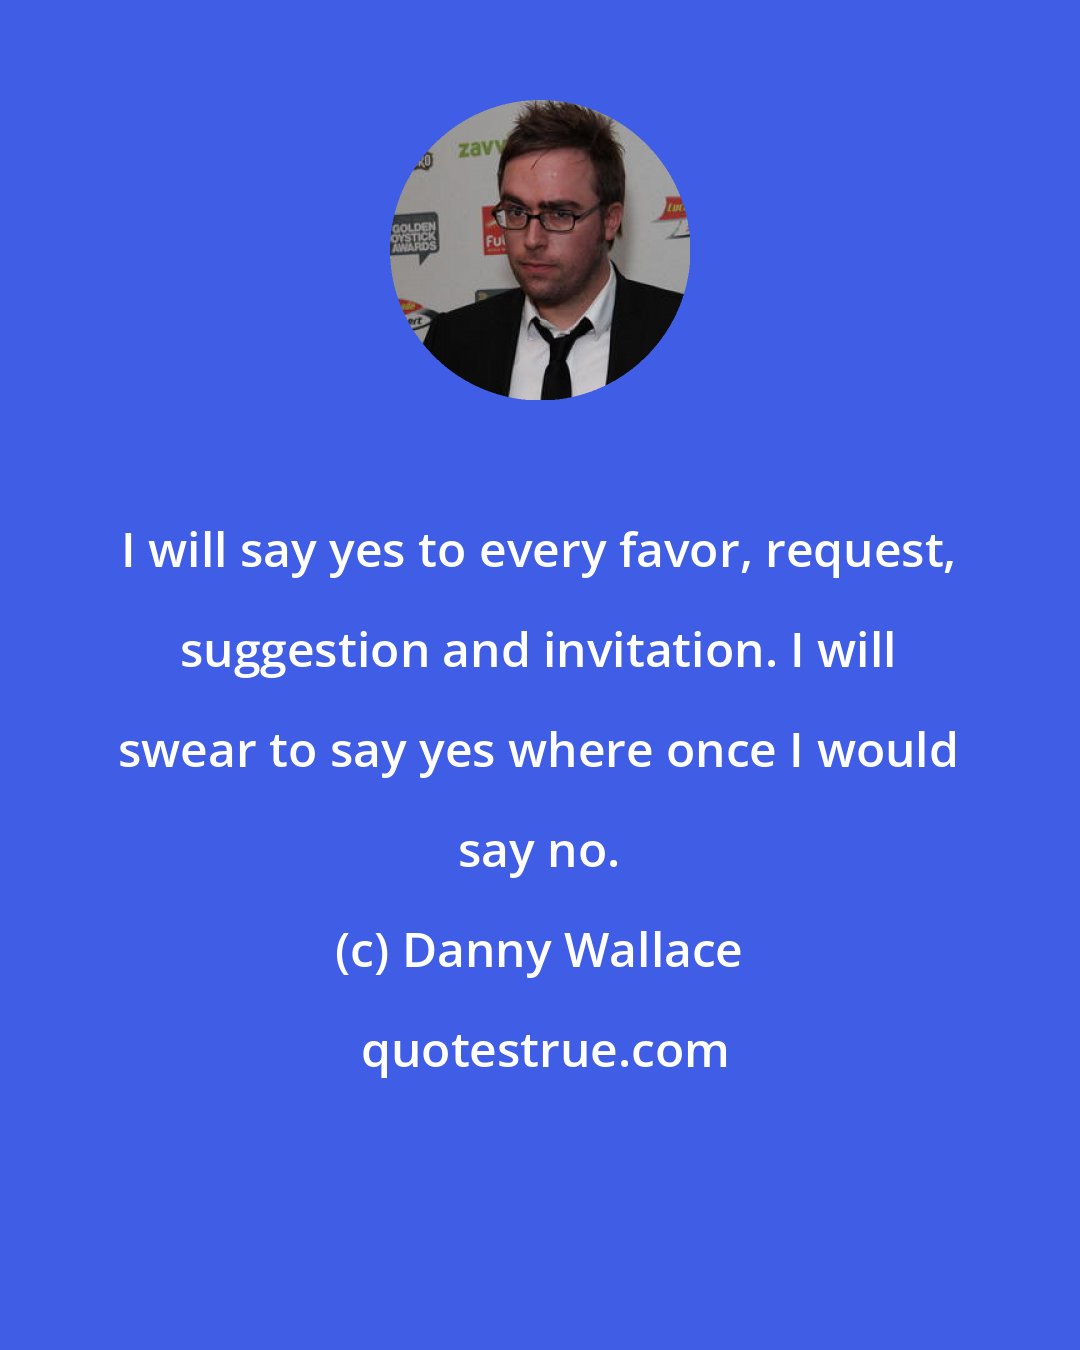 Danny Wallace: I will say yes to every favor, request, suggestion and invitation. I will swear to say yes where once I would say no.